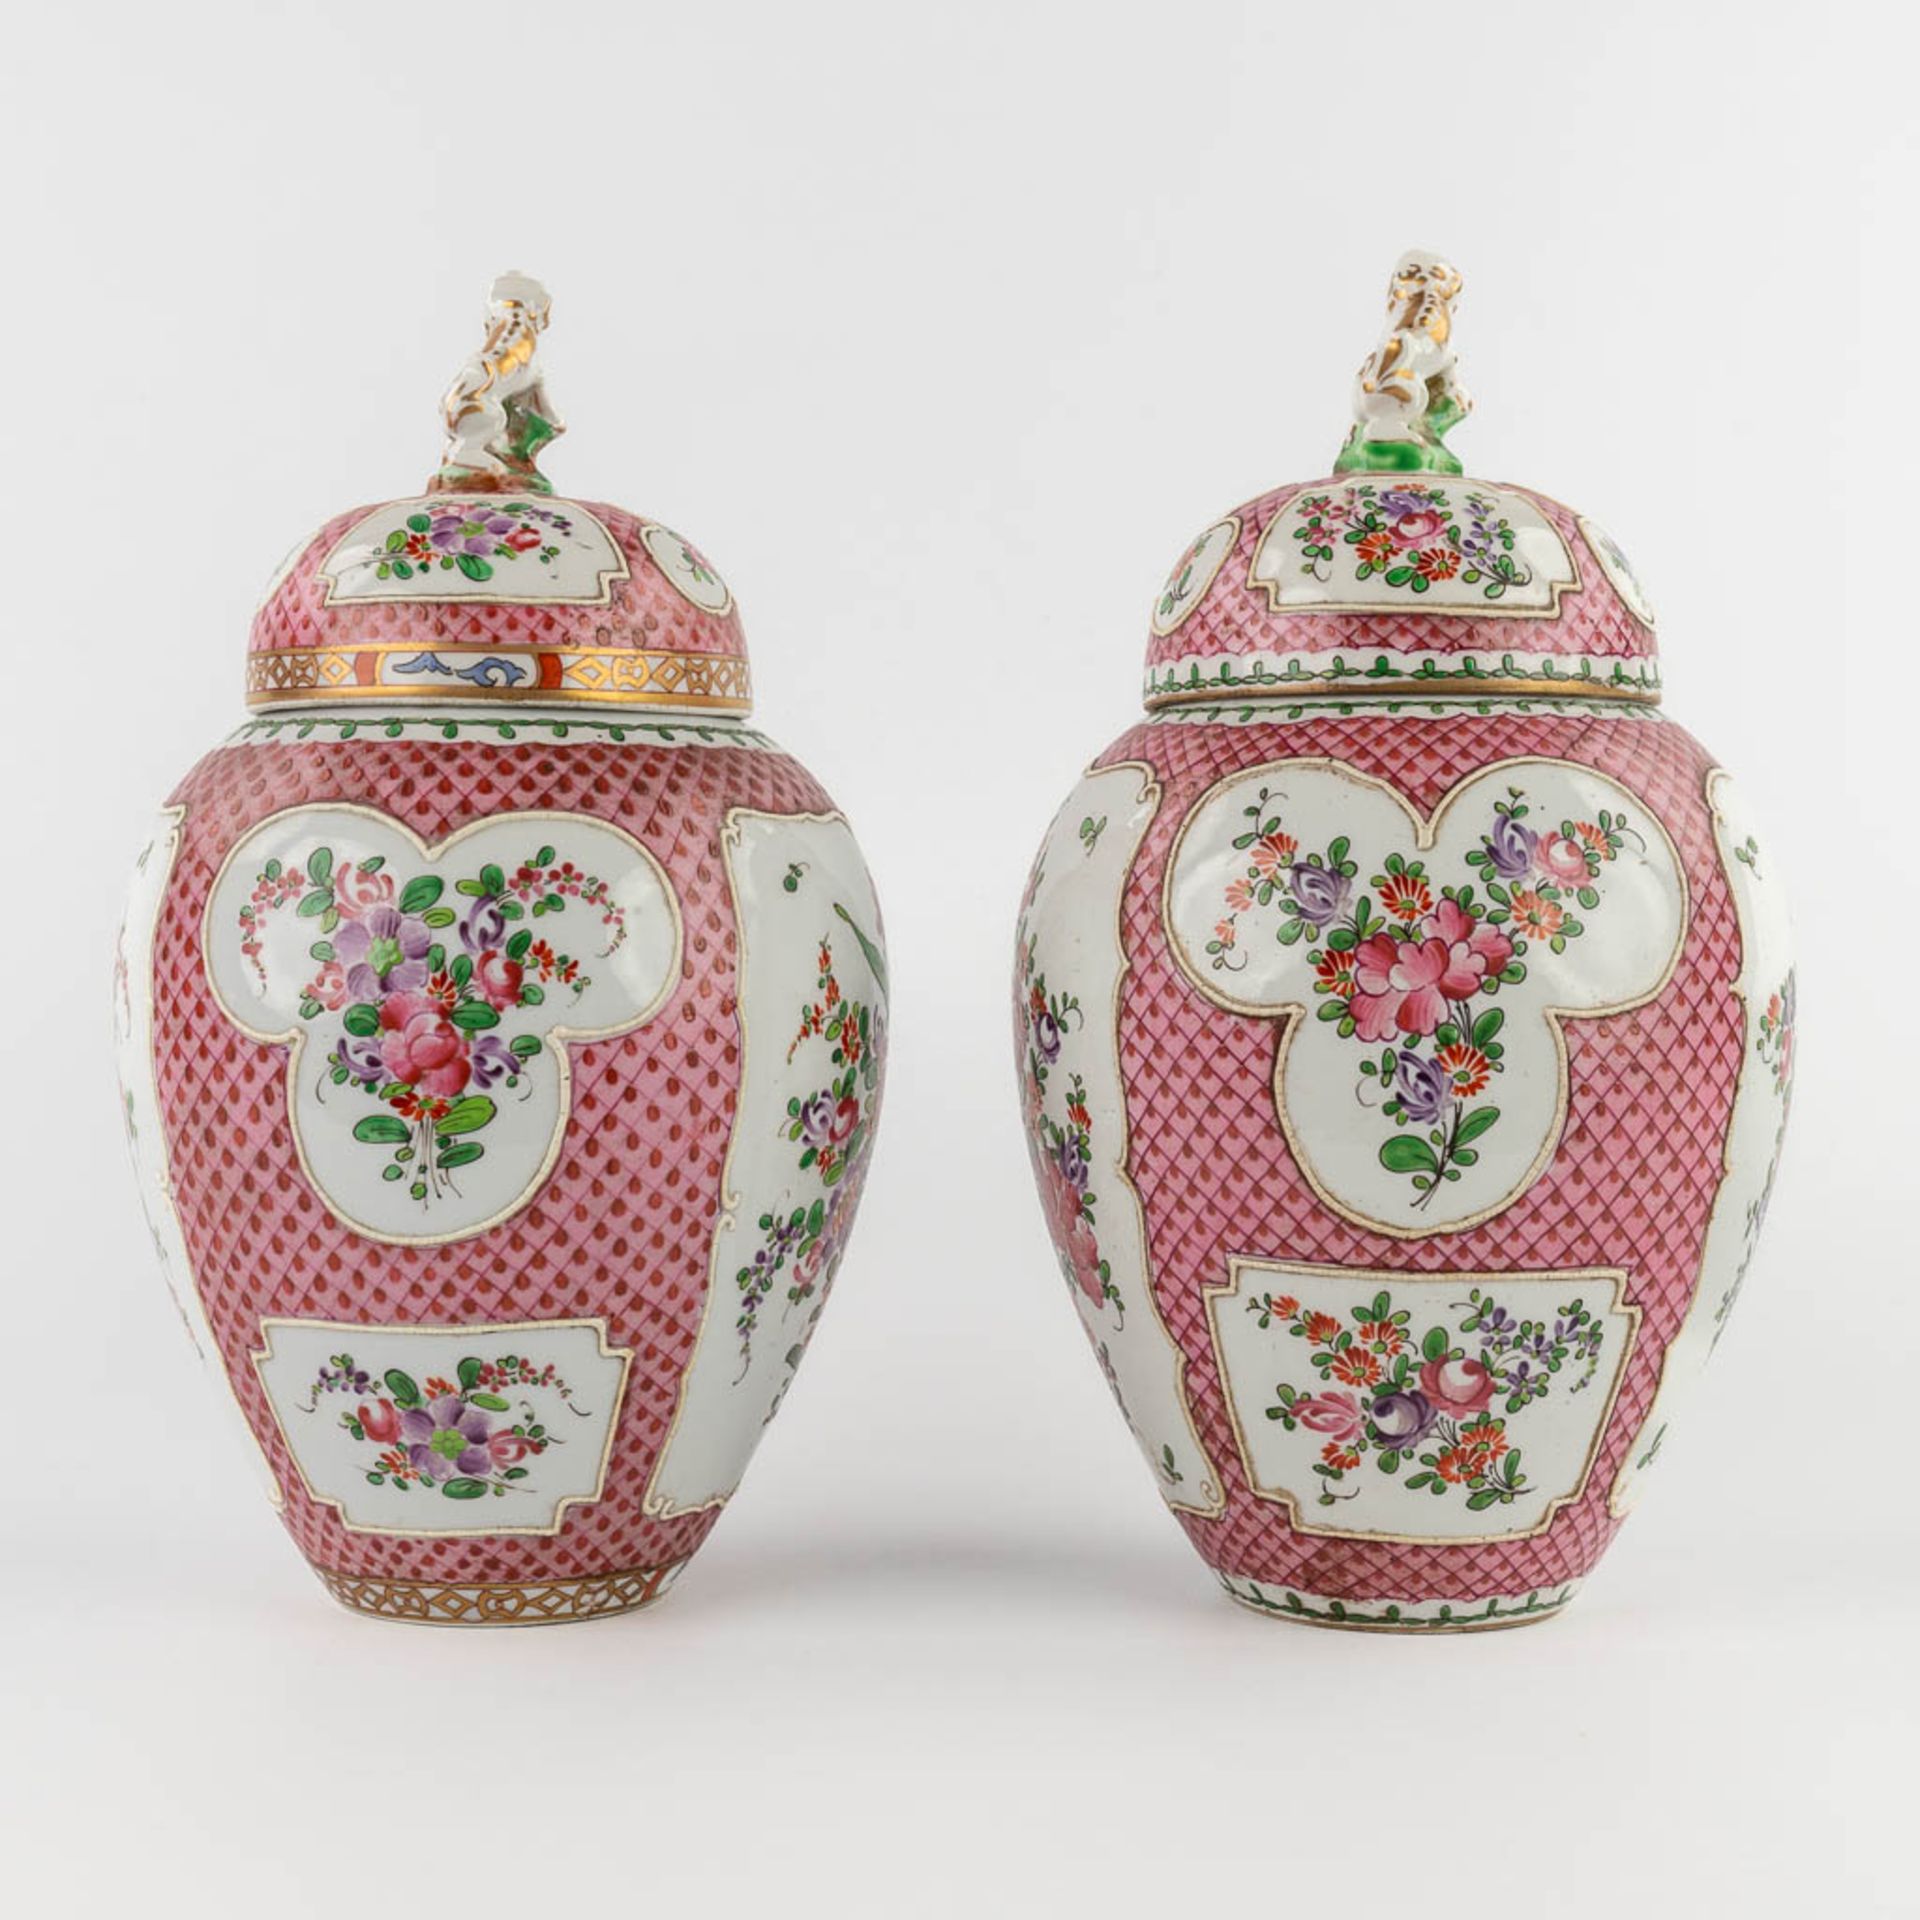 Samson, a pair of Oriental inspired vases with a hand-painted flower decor. (H:27 x D:15 cm) - Image 12 of 16